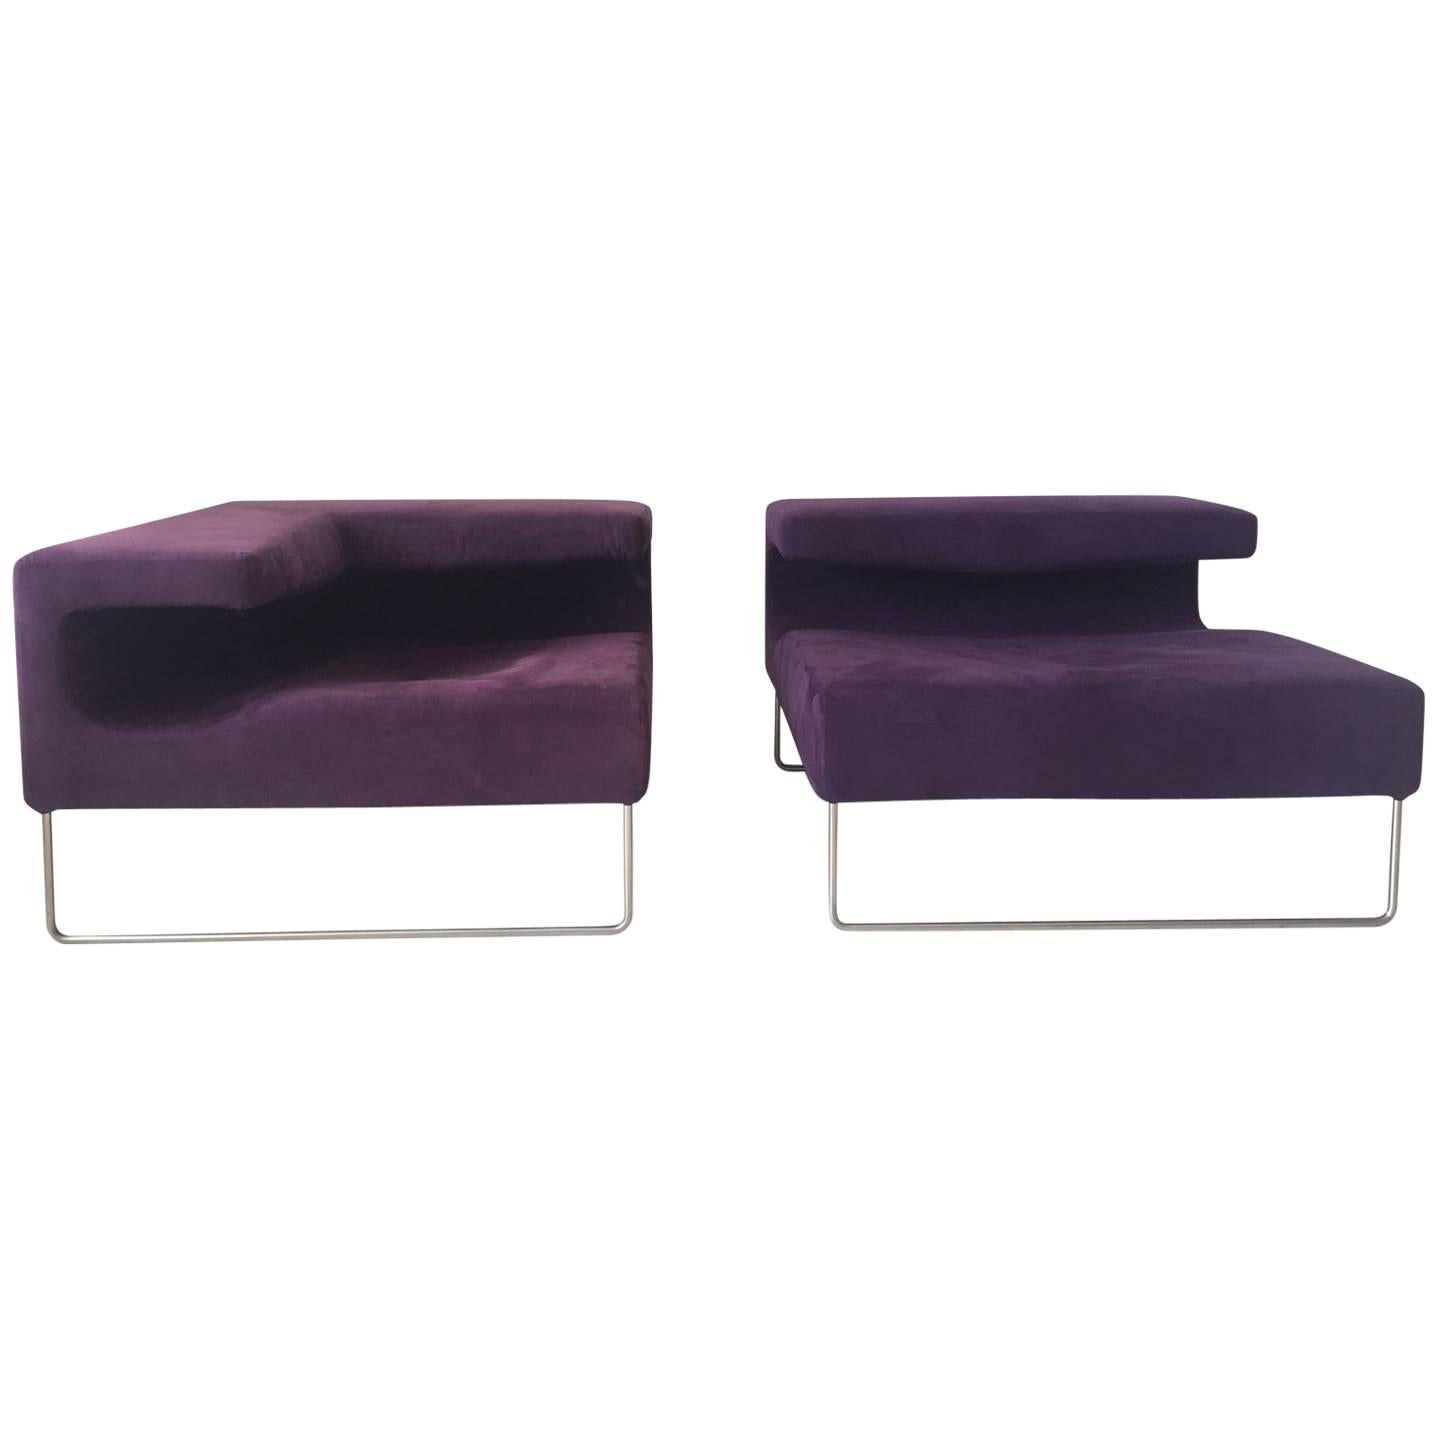 Minimalistic Purple Suede Chairs by Patricia Urquiola for Moroso